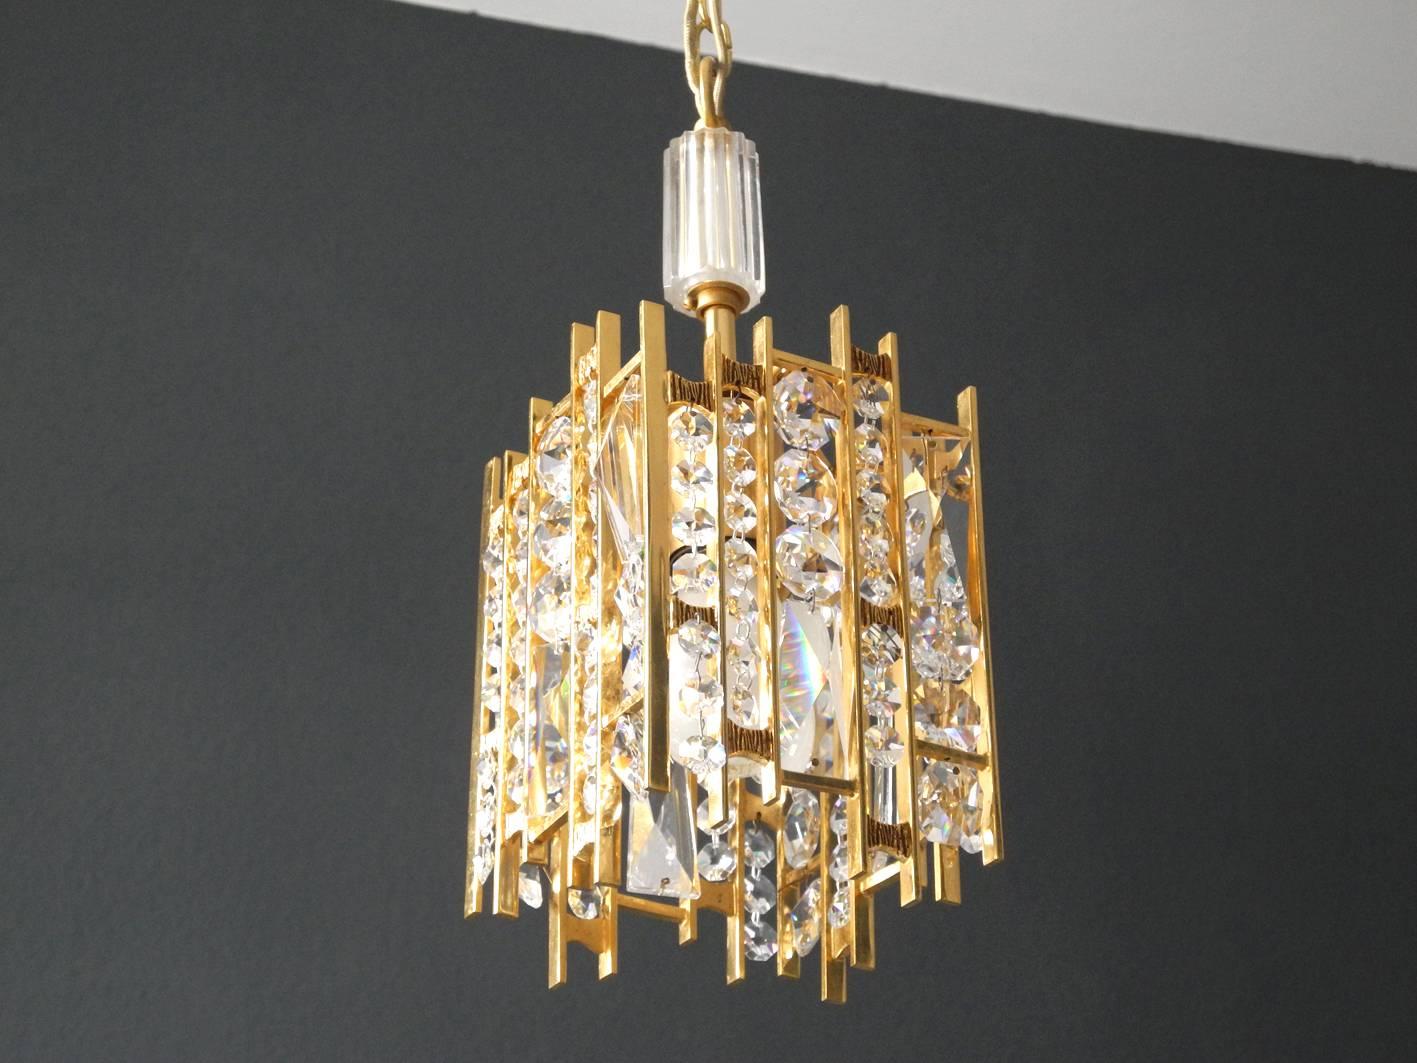 Beautiful 1970s Palwa brass pendant lamp with faceted crystal stones in Brutalist design. High-quality work, frame and sockets made of brass. Produced by Pawla in the 1970s. Made in Germany. Great rare design for very pleasant illumination with one